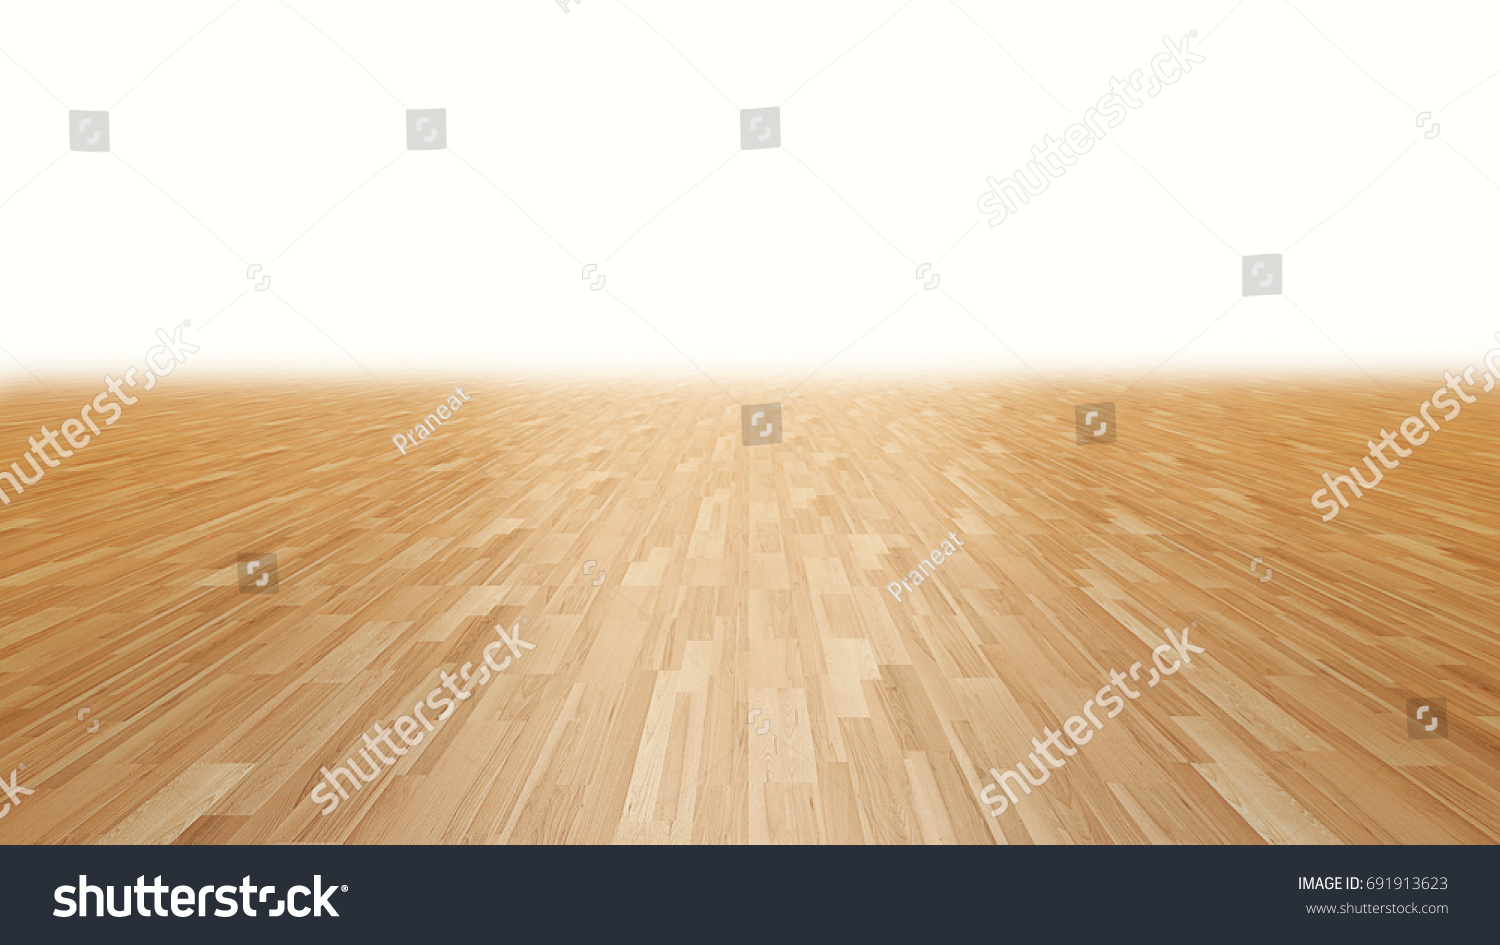 Wood floor fading into white background 3d rendering perspective #691913623